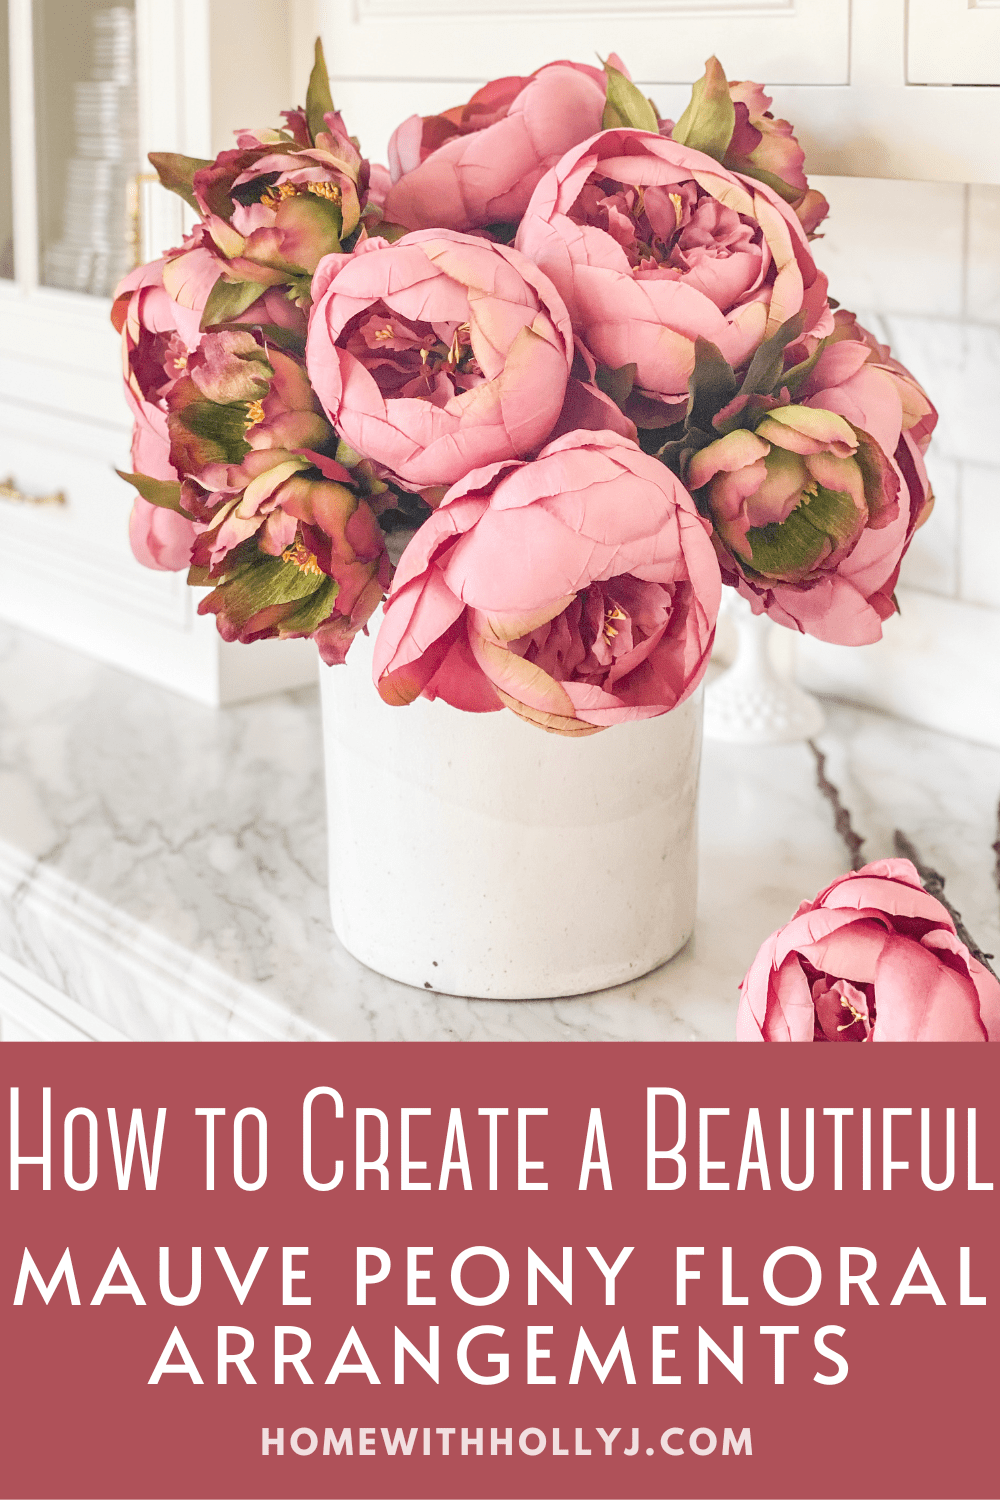 Learn how to arrange mauve faux peonies for beautiful and lasting spring floral arrangements with this step-by-step guide.